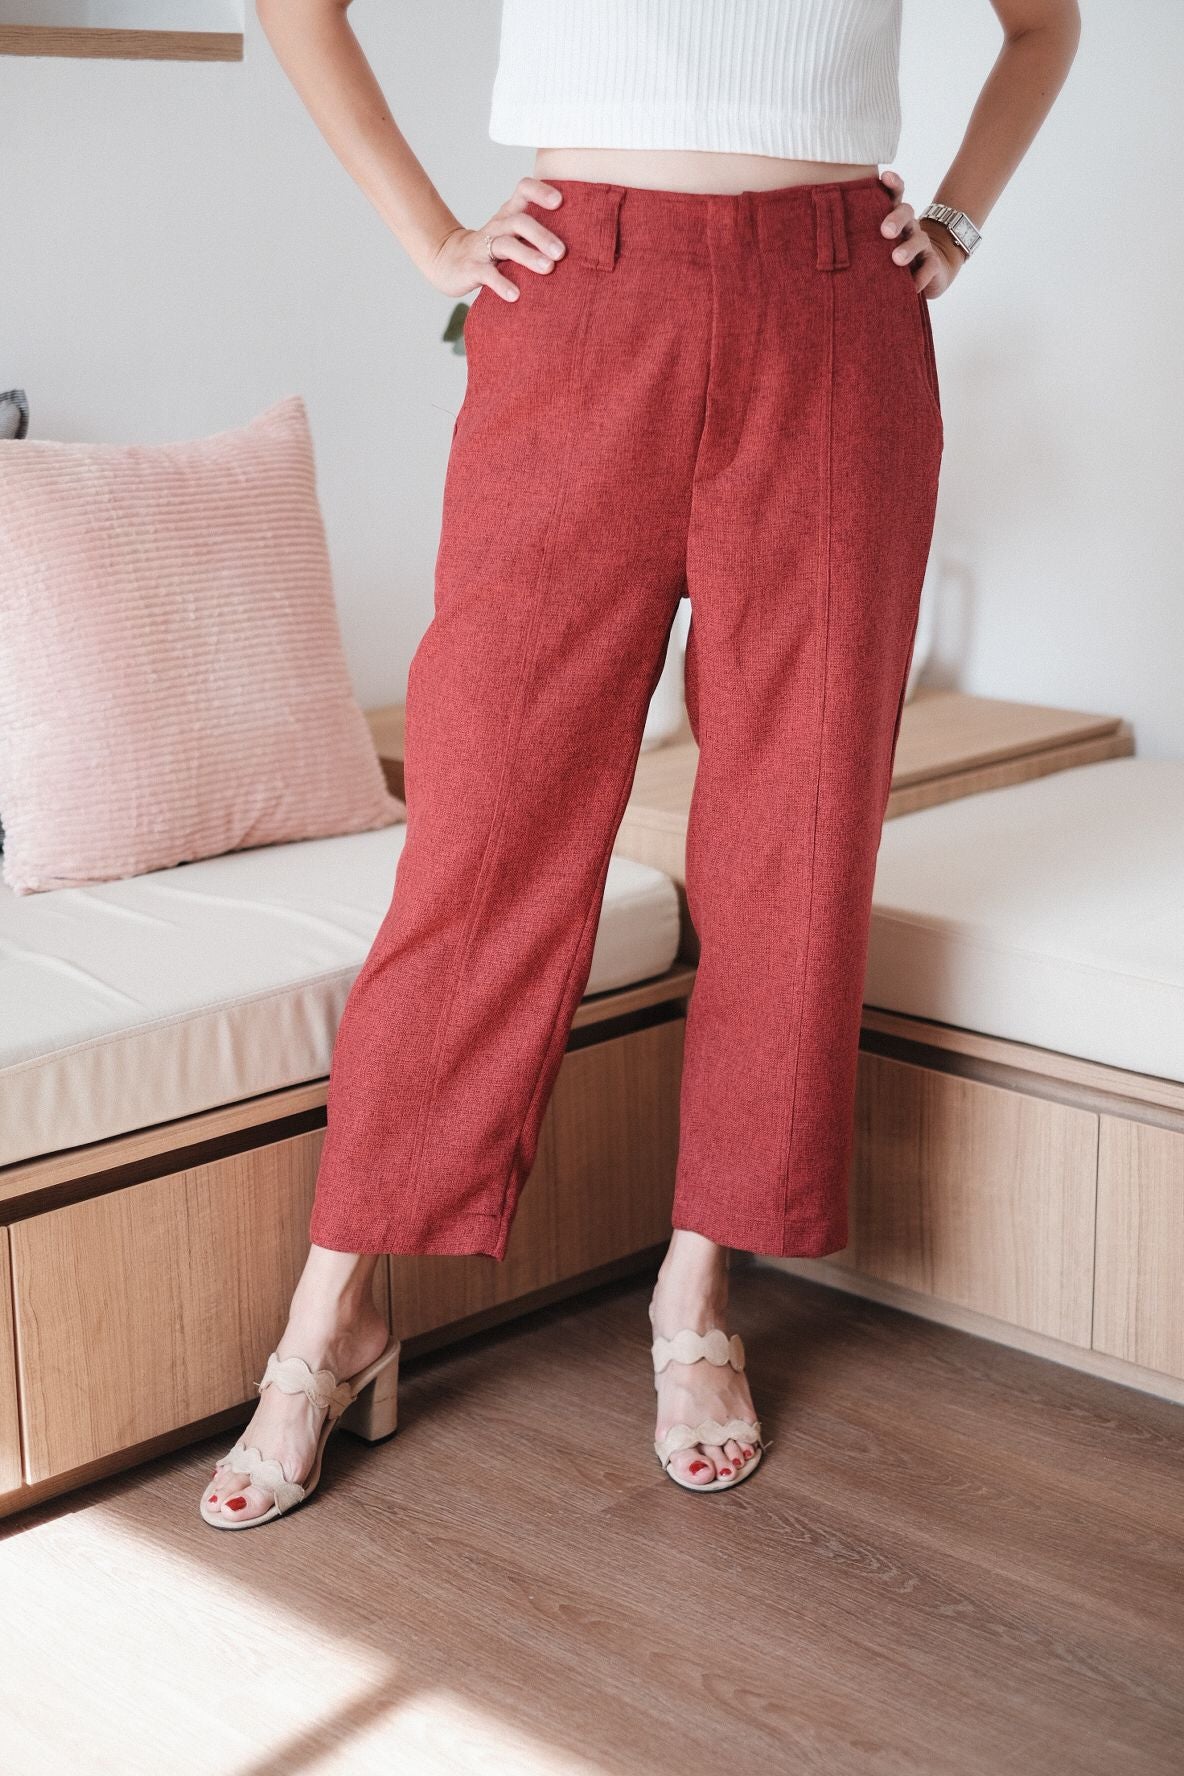 LONG KATIA PANTS IN FRENCH CHERRY